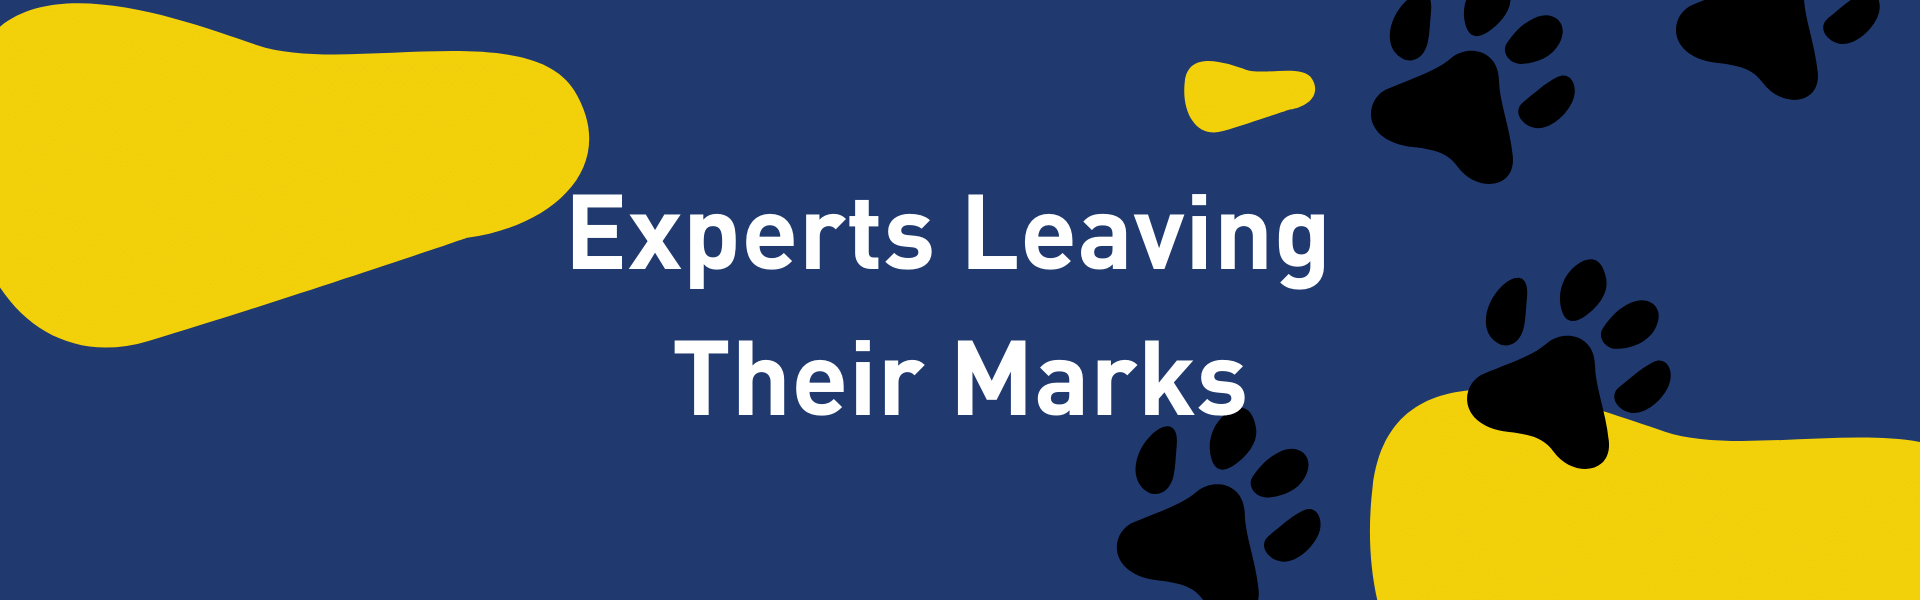 ISKL - EXPERTS LEAVING THEIR MARKS